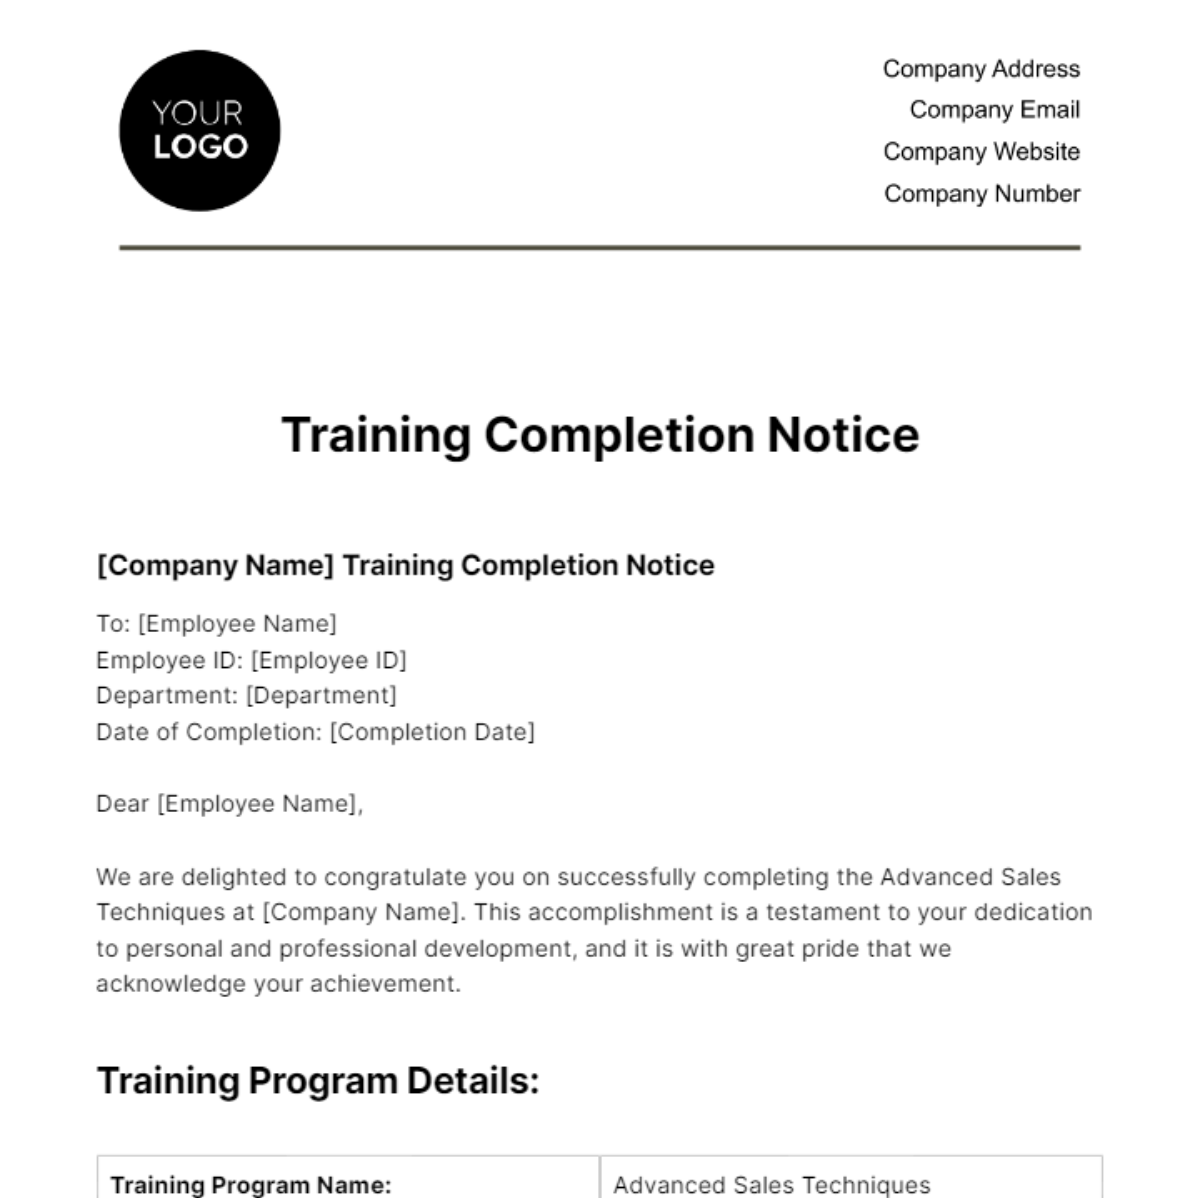 Training Completion Notice HR Template